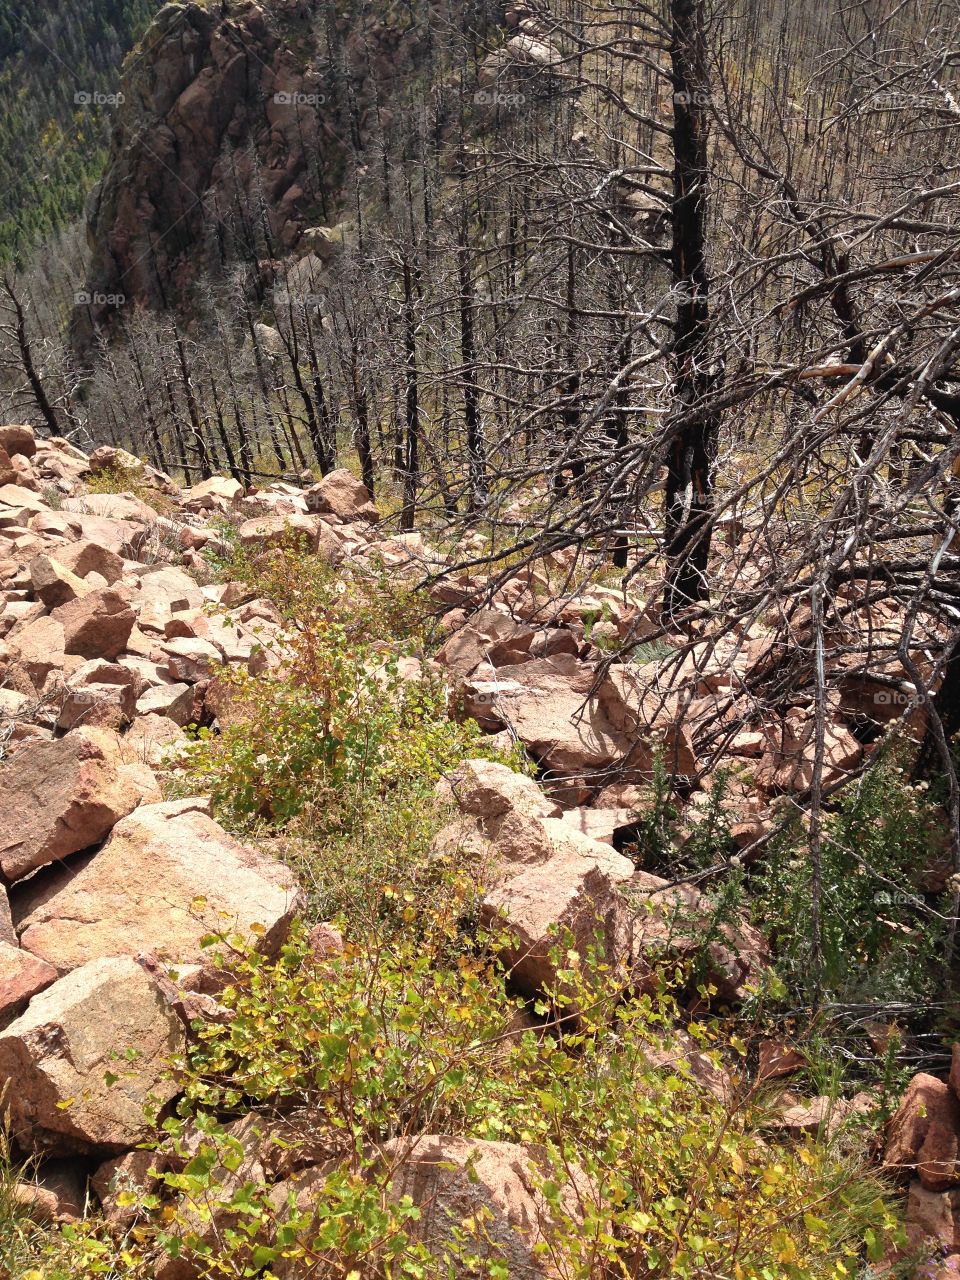 Burnt trees from the Waldo Canyon fire